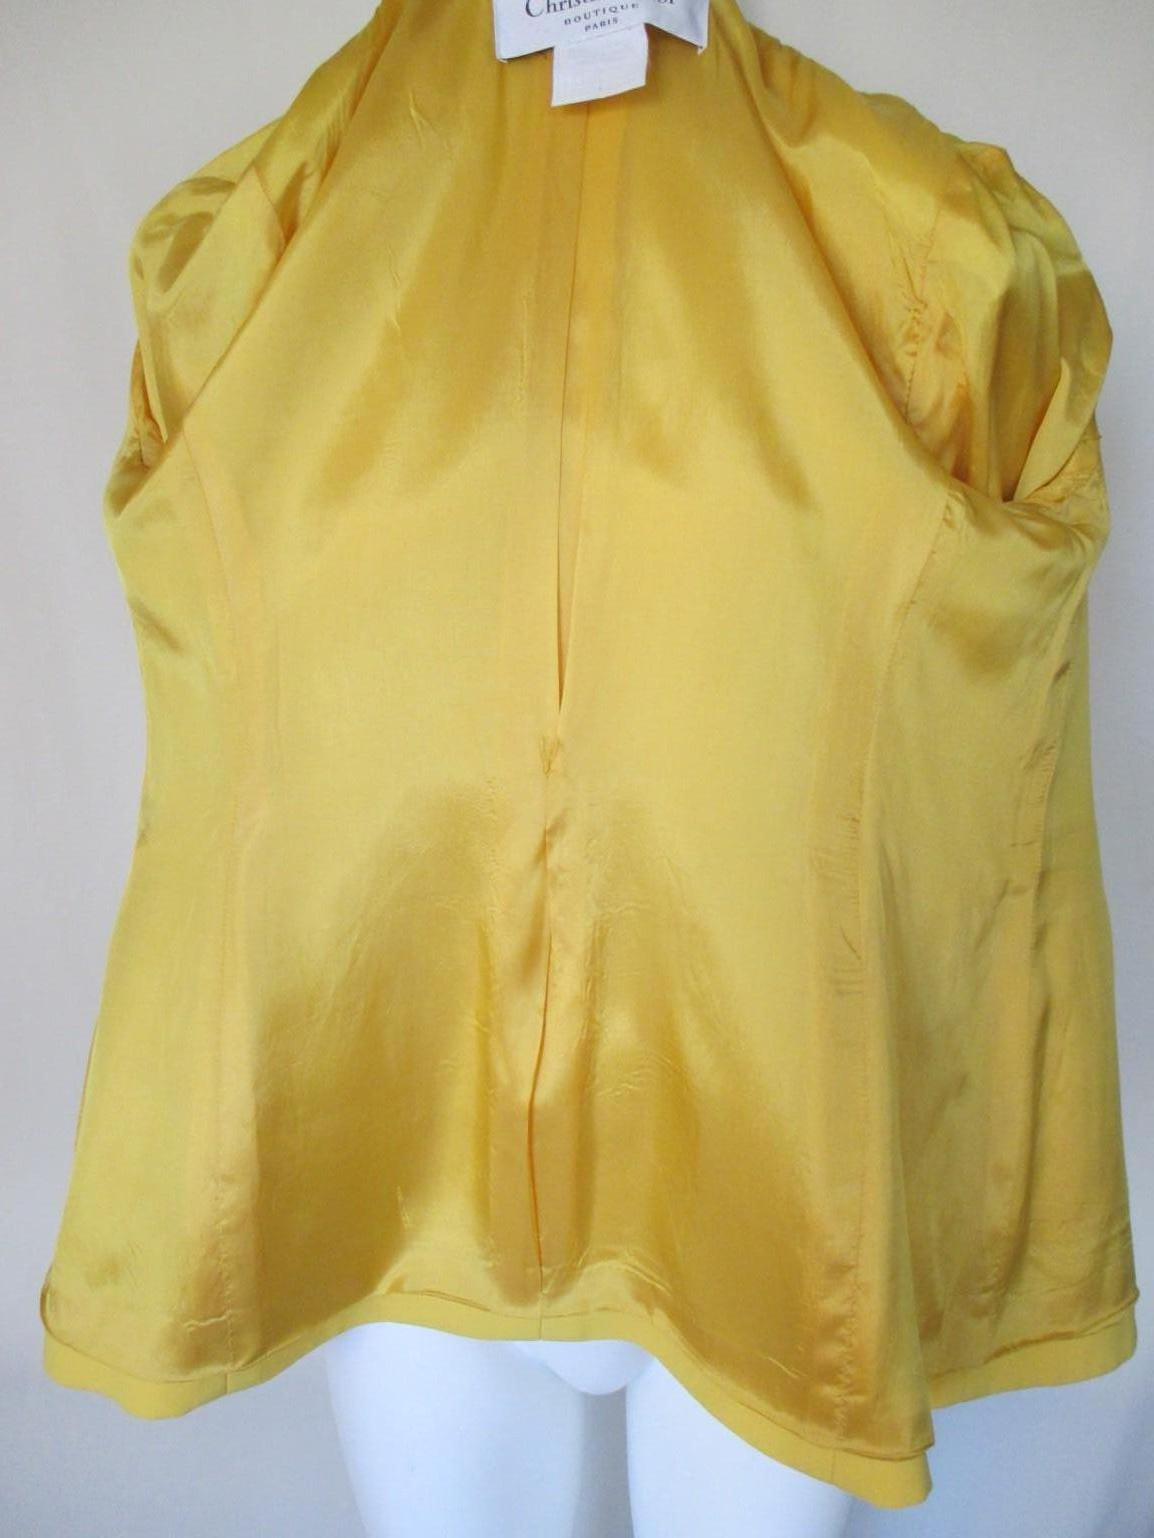 Christian Dior Paris Yellow Blazer In Good Condition For Sale In Amsterdam, NL